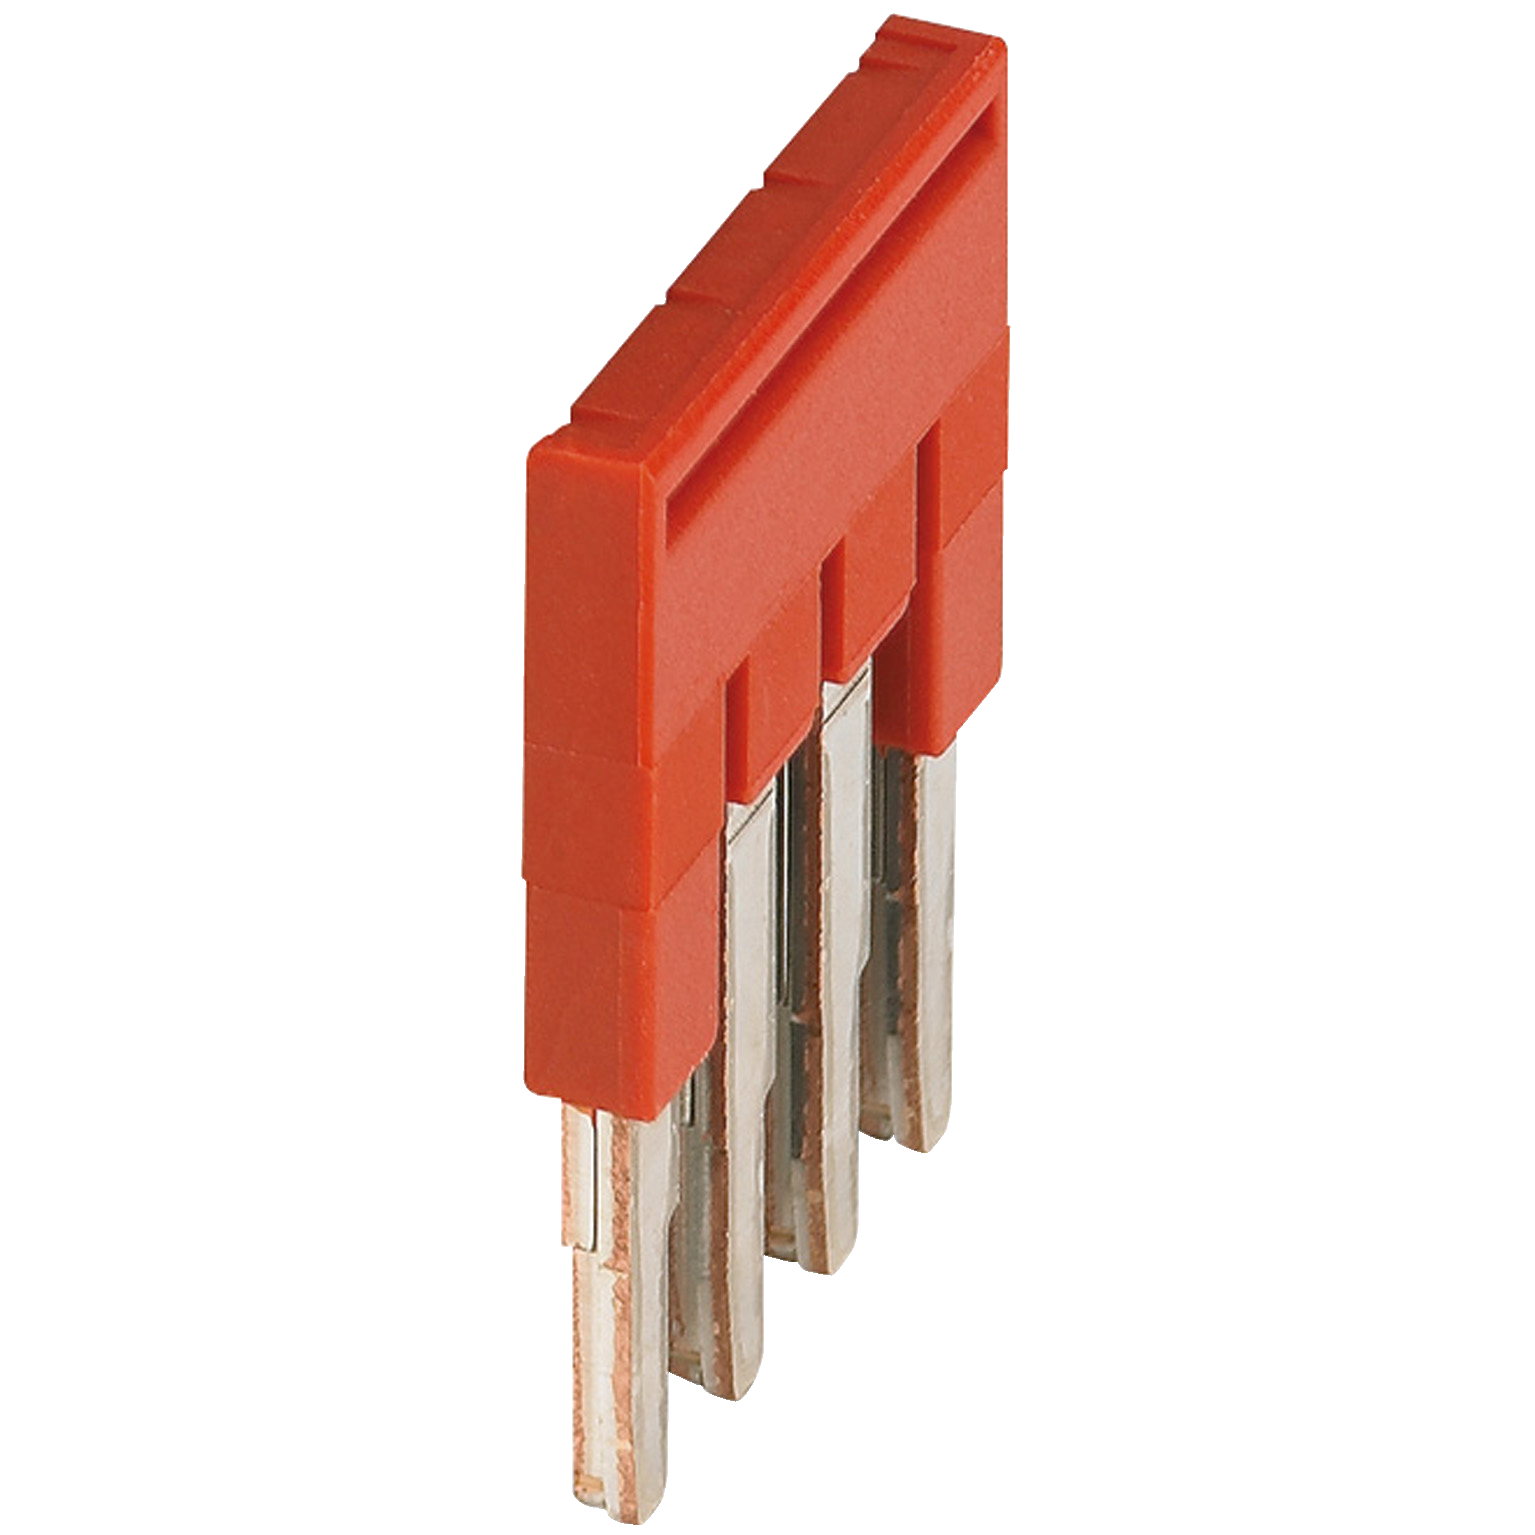 Plug-in bridge, Linergy TR, 4 points, for 2.5mm² terminal blocks, red, 4 way, set of 50